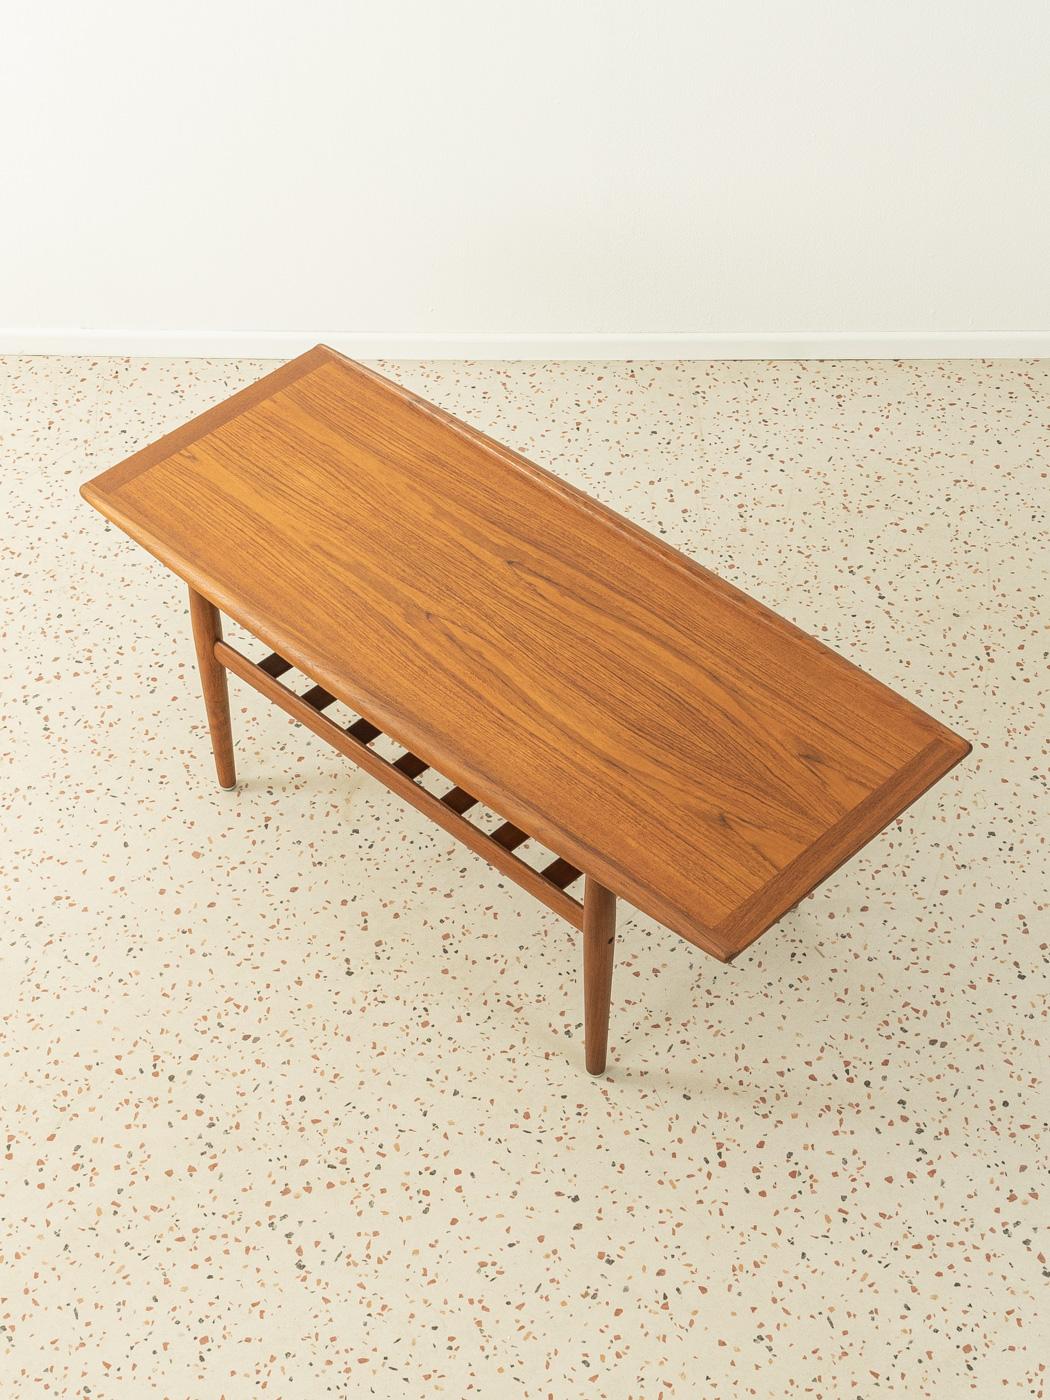 Mid-Century Modern Grete Jalk Coffee Table Manufactured by Glostrup, 1960s, Made in Denmark For Sale